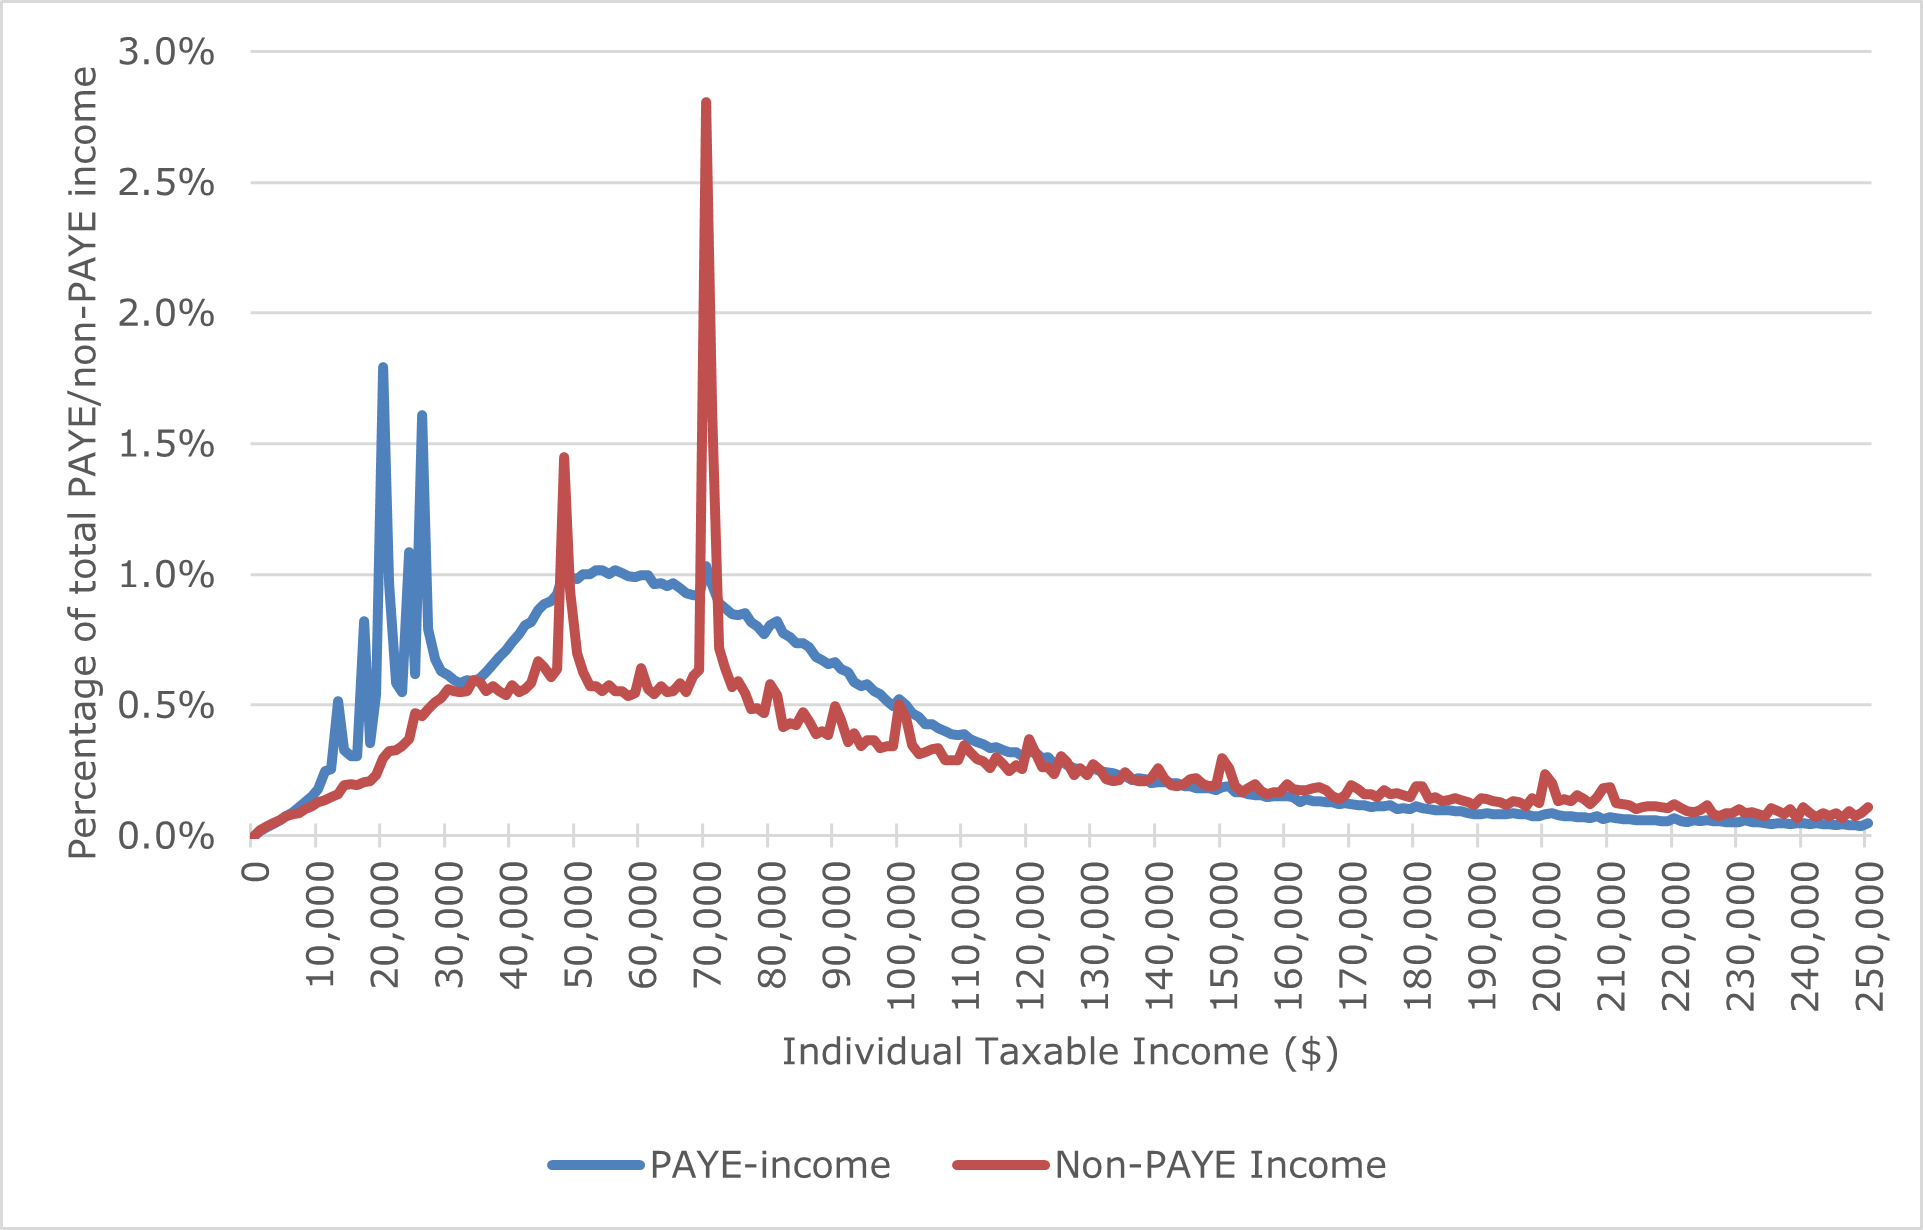 Taxable income distribution: PAYE and non-PAYE income (year ended 31 March 2020)